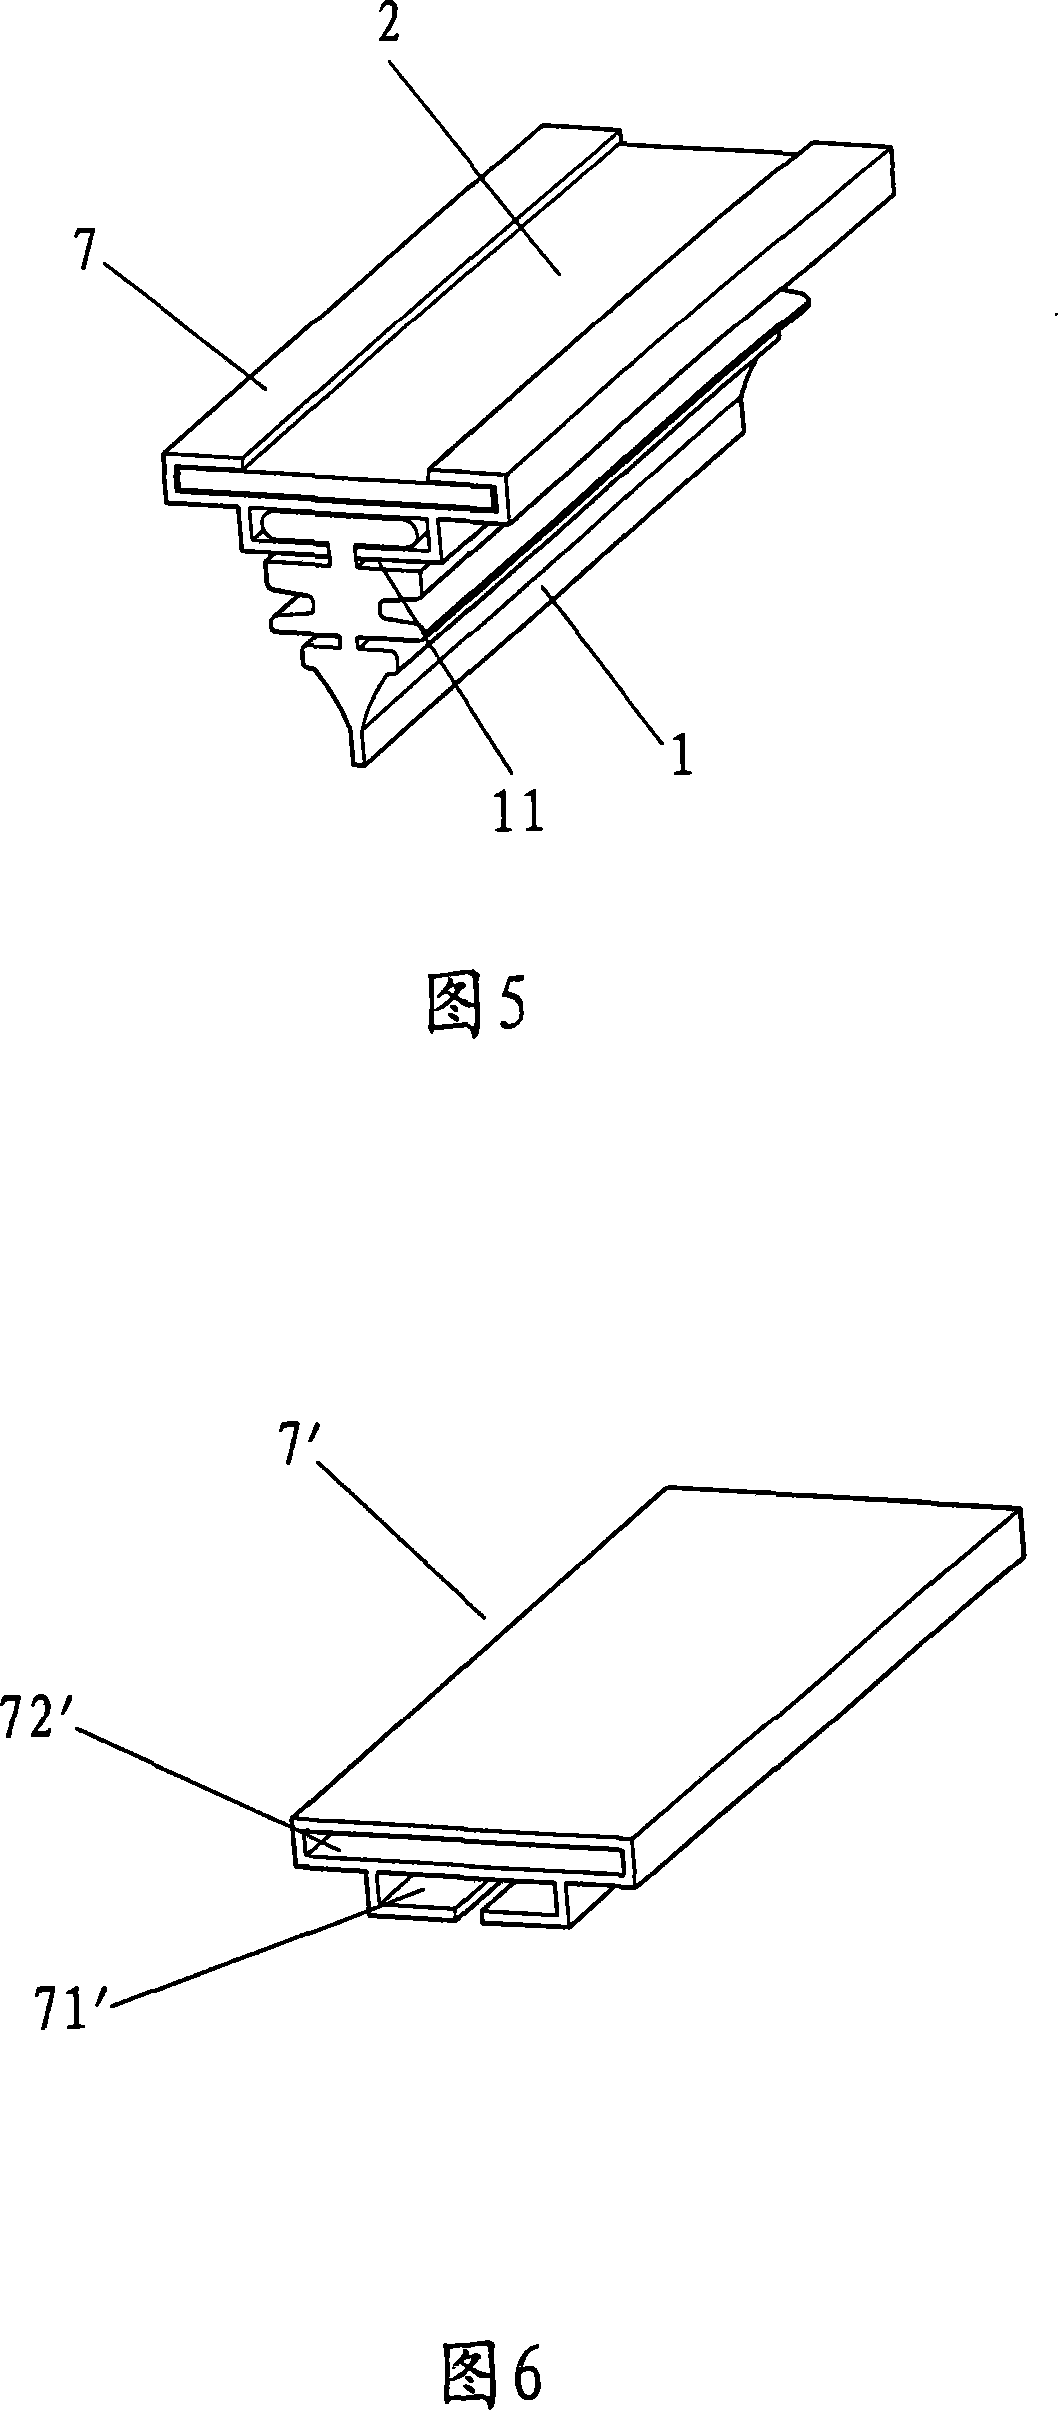 Windshield wiper connecting plate